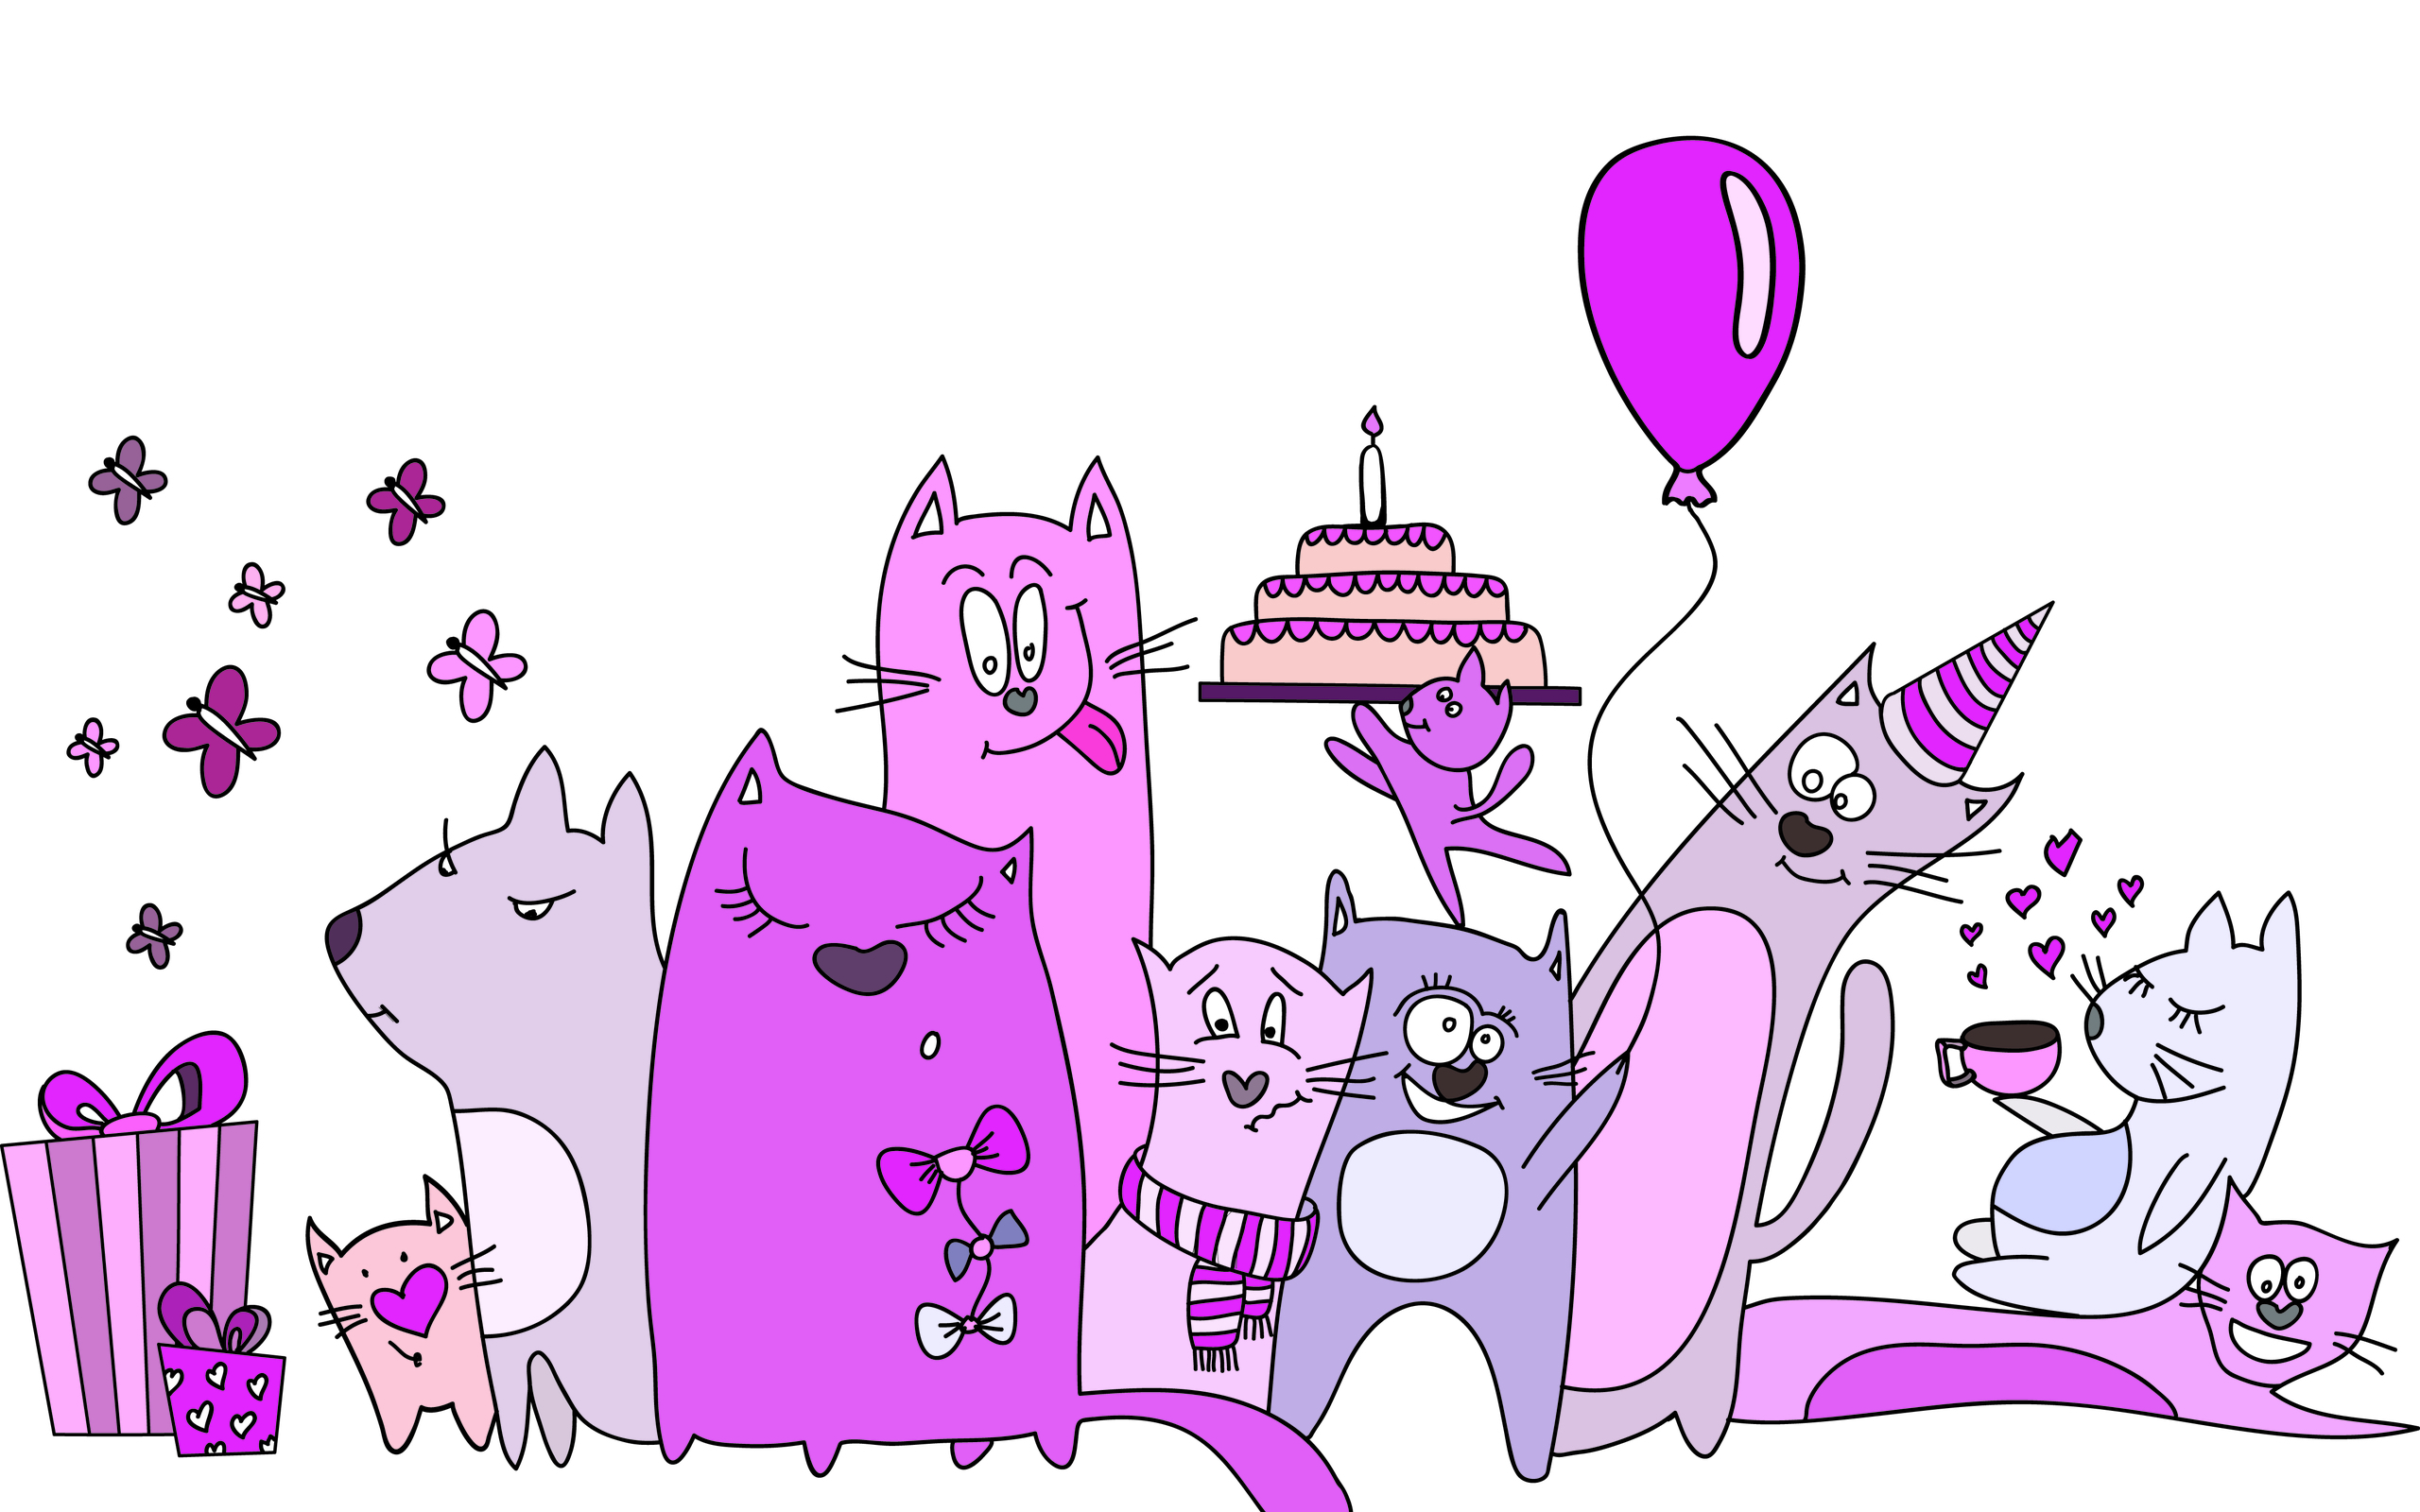 Cats BirtHDay Party Wallpaper And Image